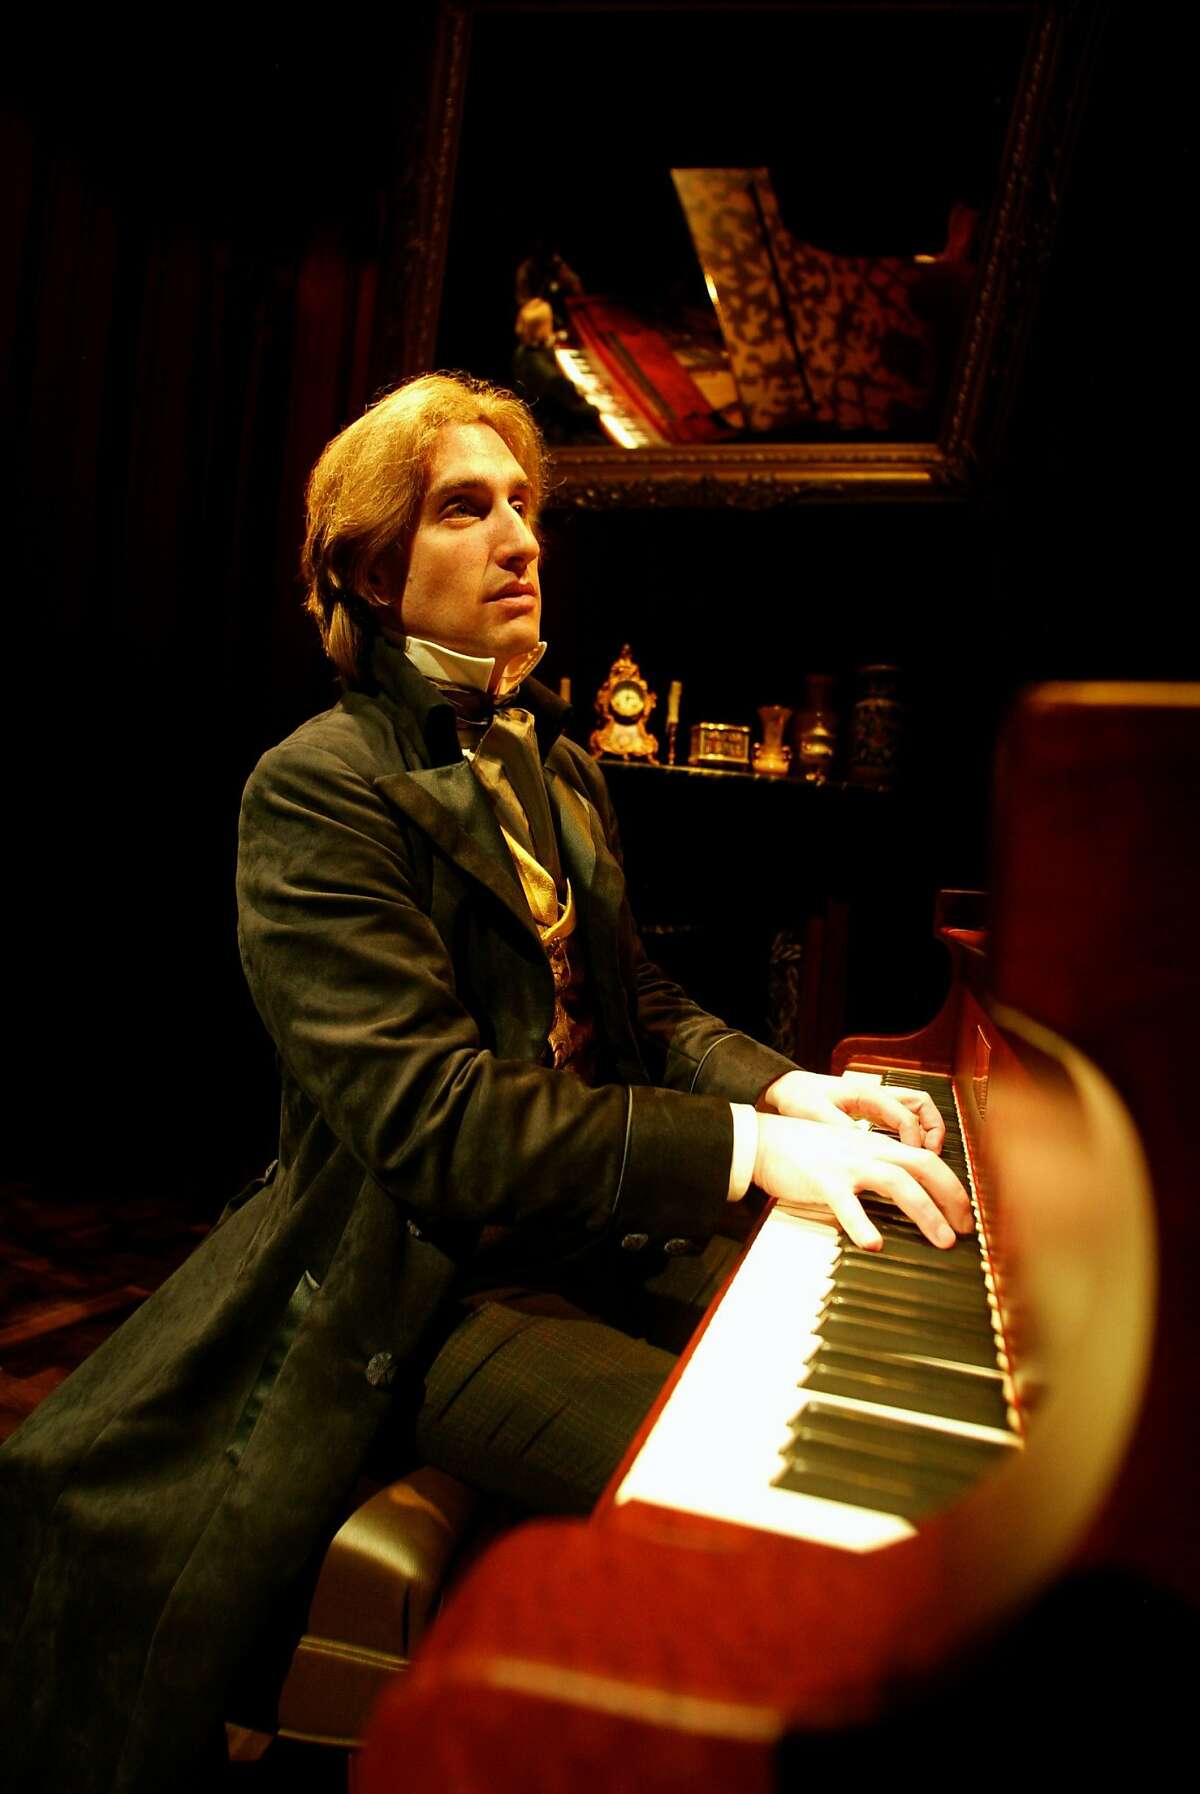 Hershey Felder as the great Romantic composer in his solo piece "Monsieur Chopin"